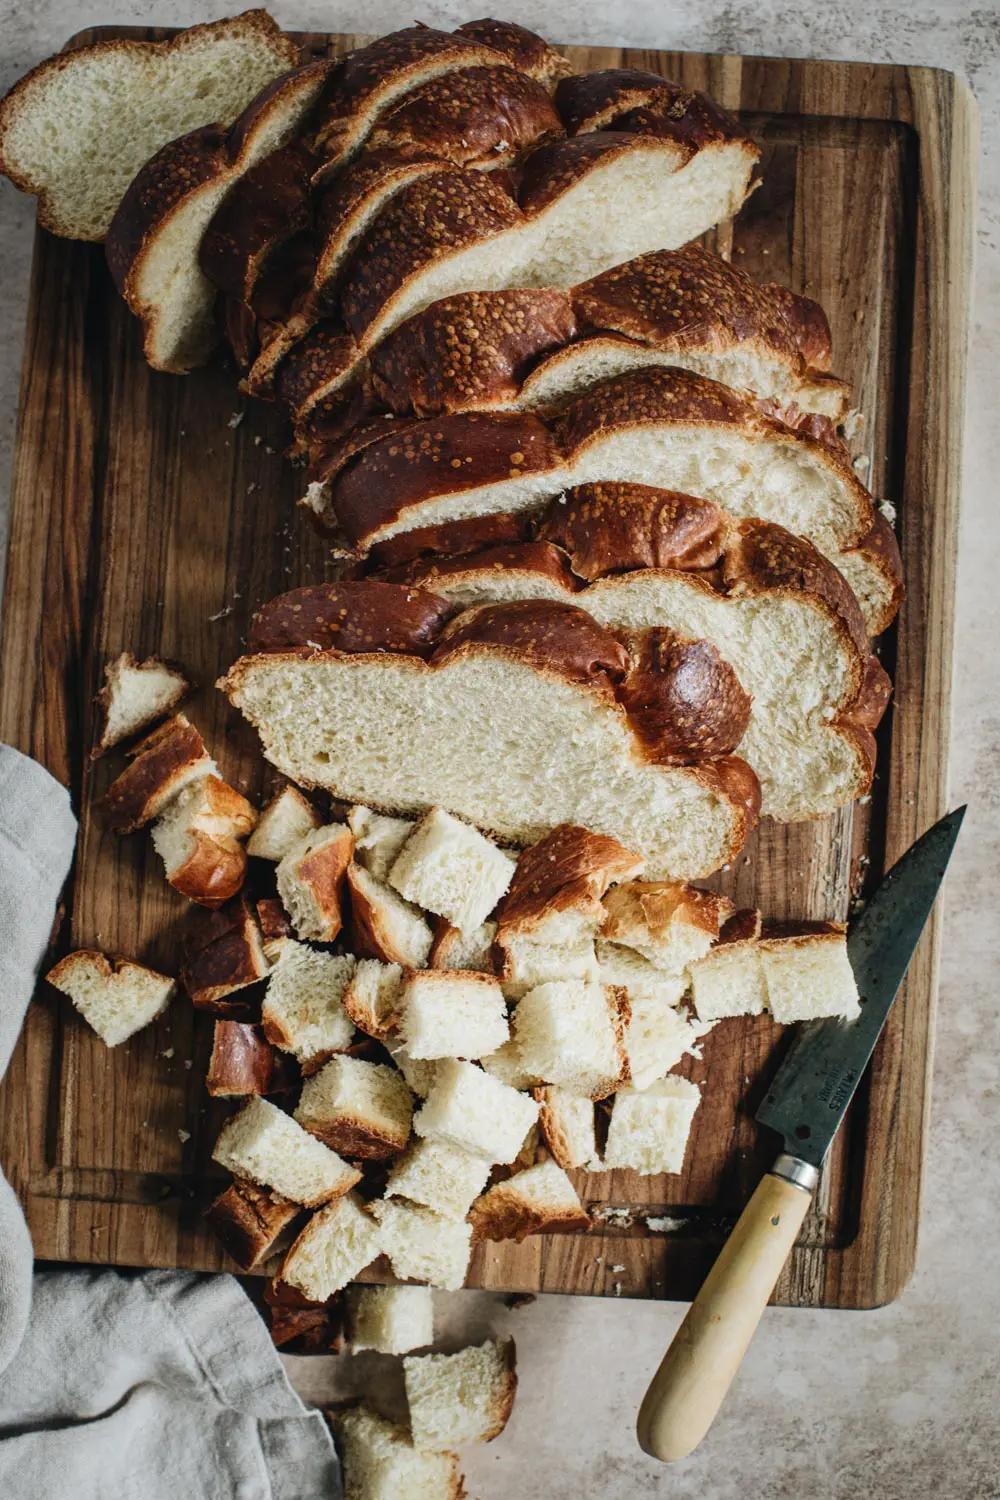 Sliced and cubed challah bread.